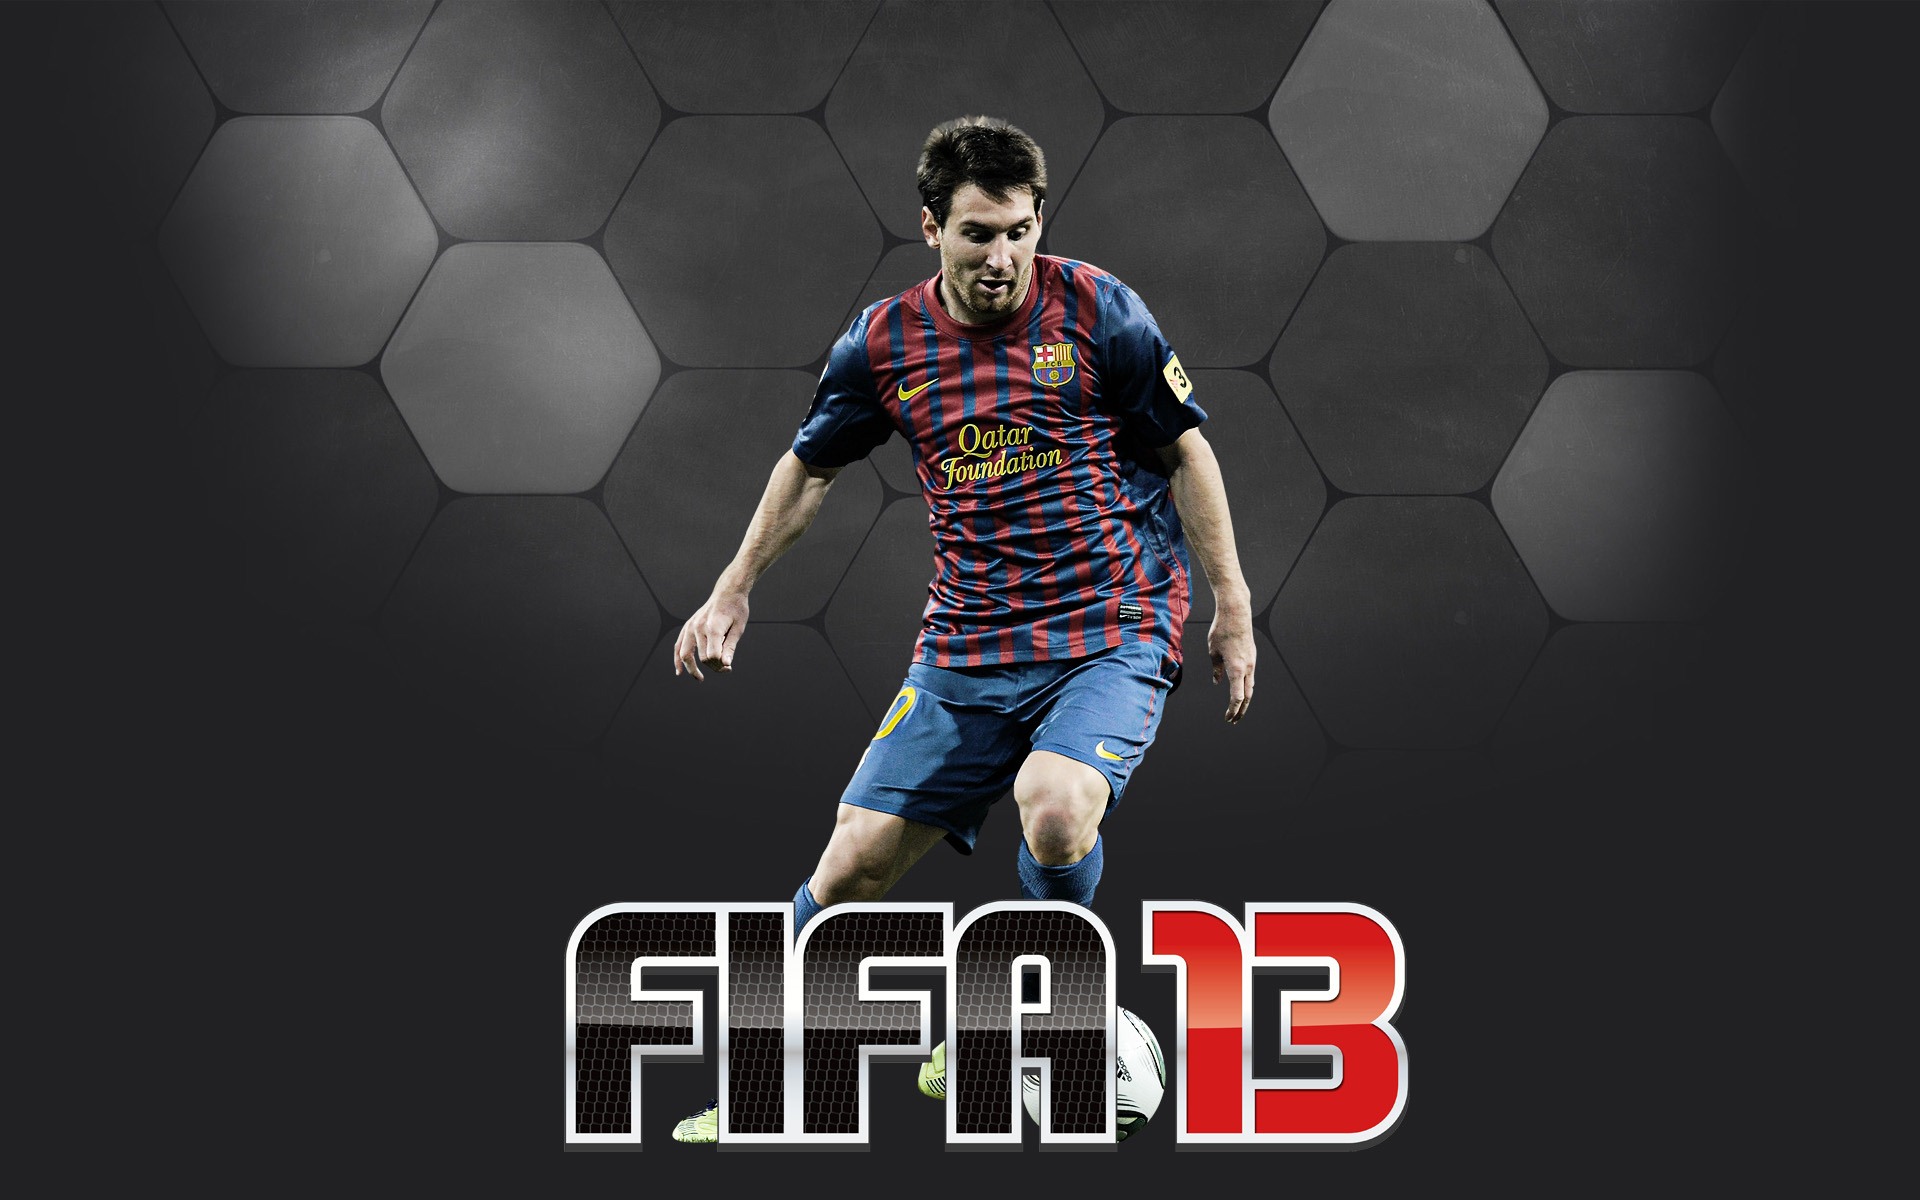 FIFA 13 game HD wallpapers #6 - 1920x1200